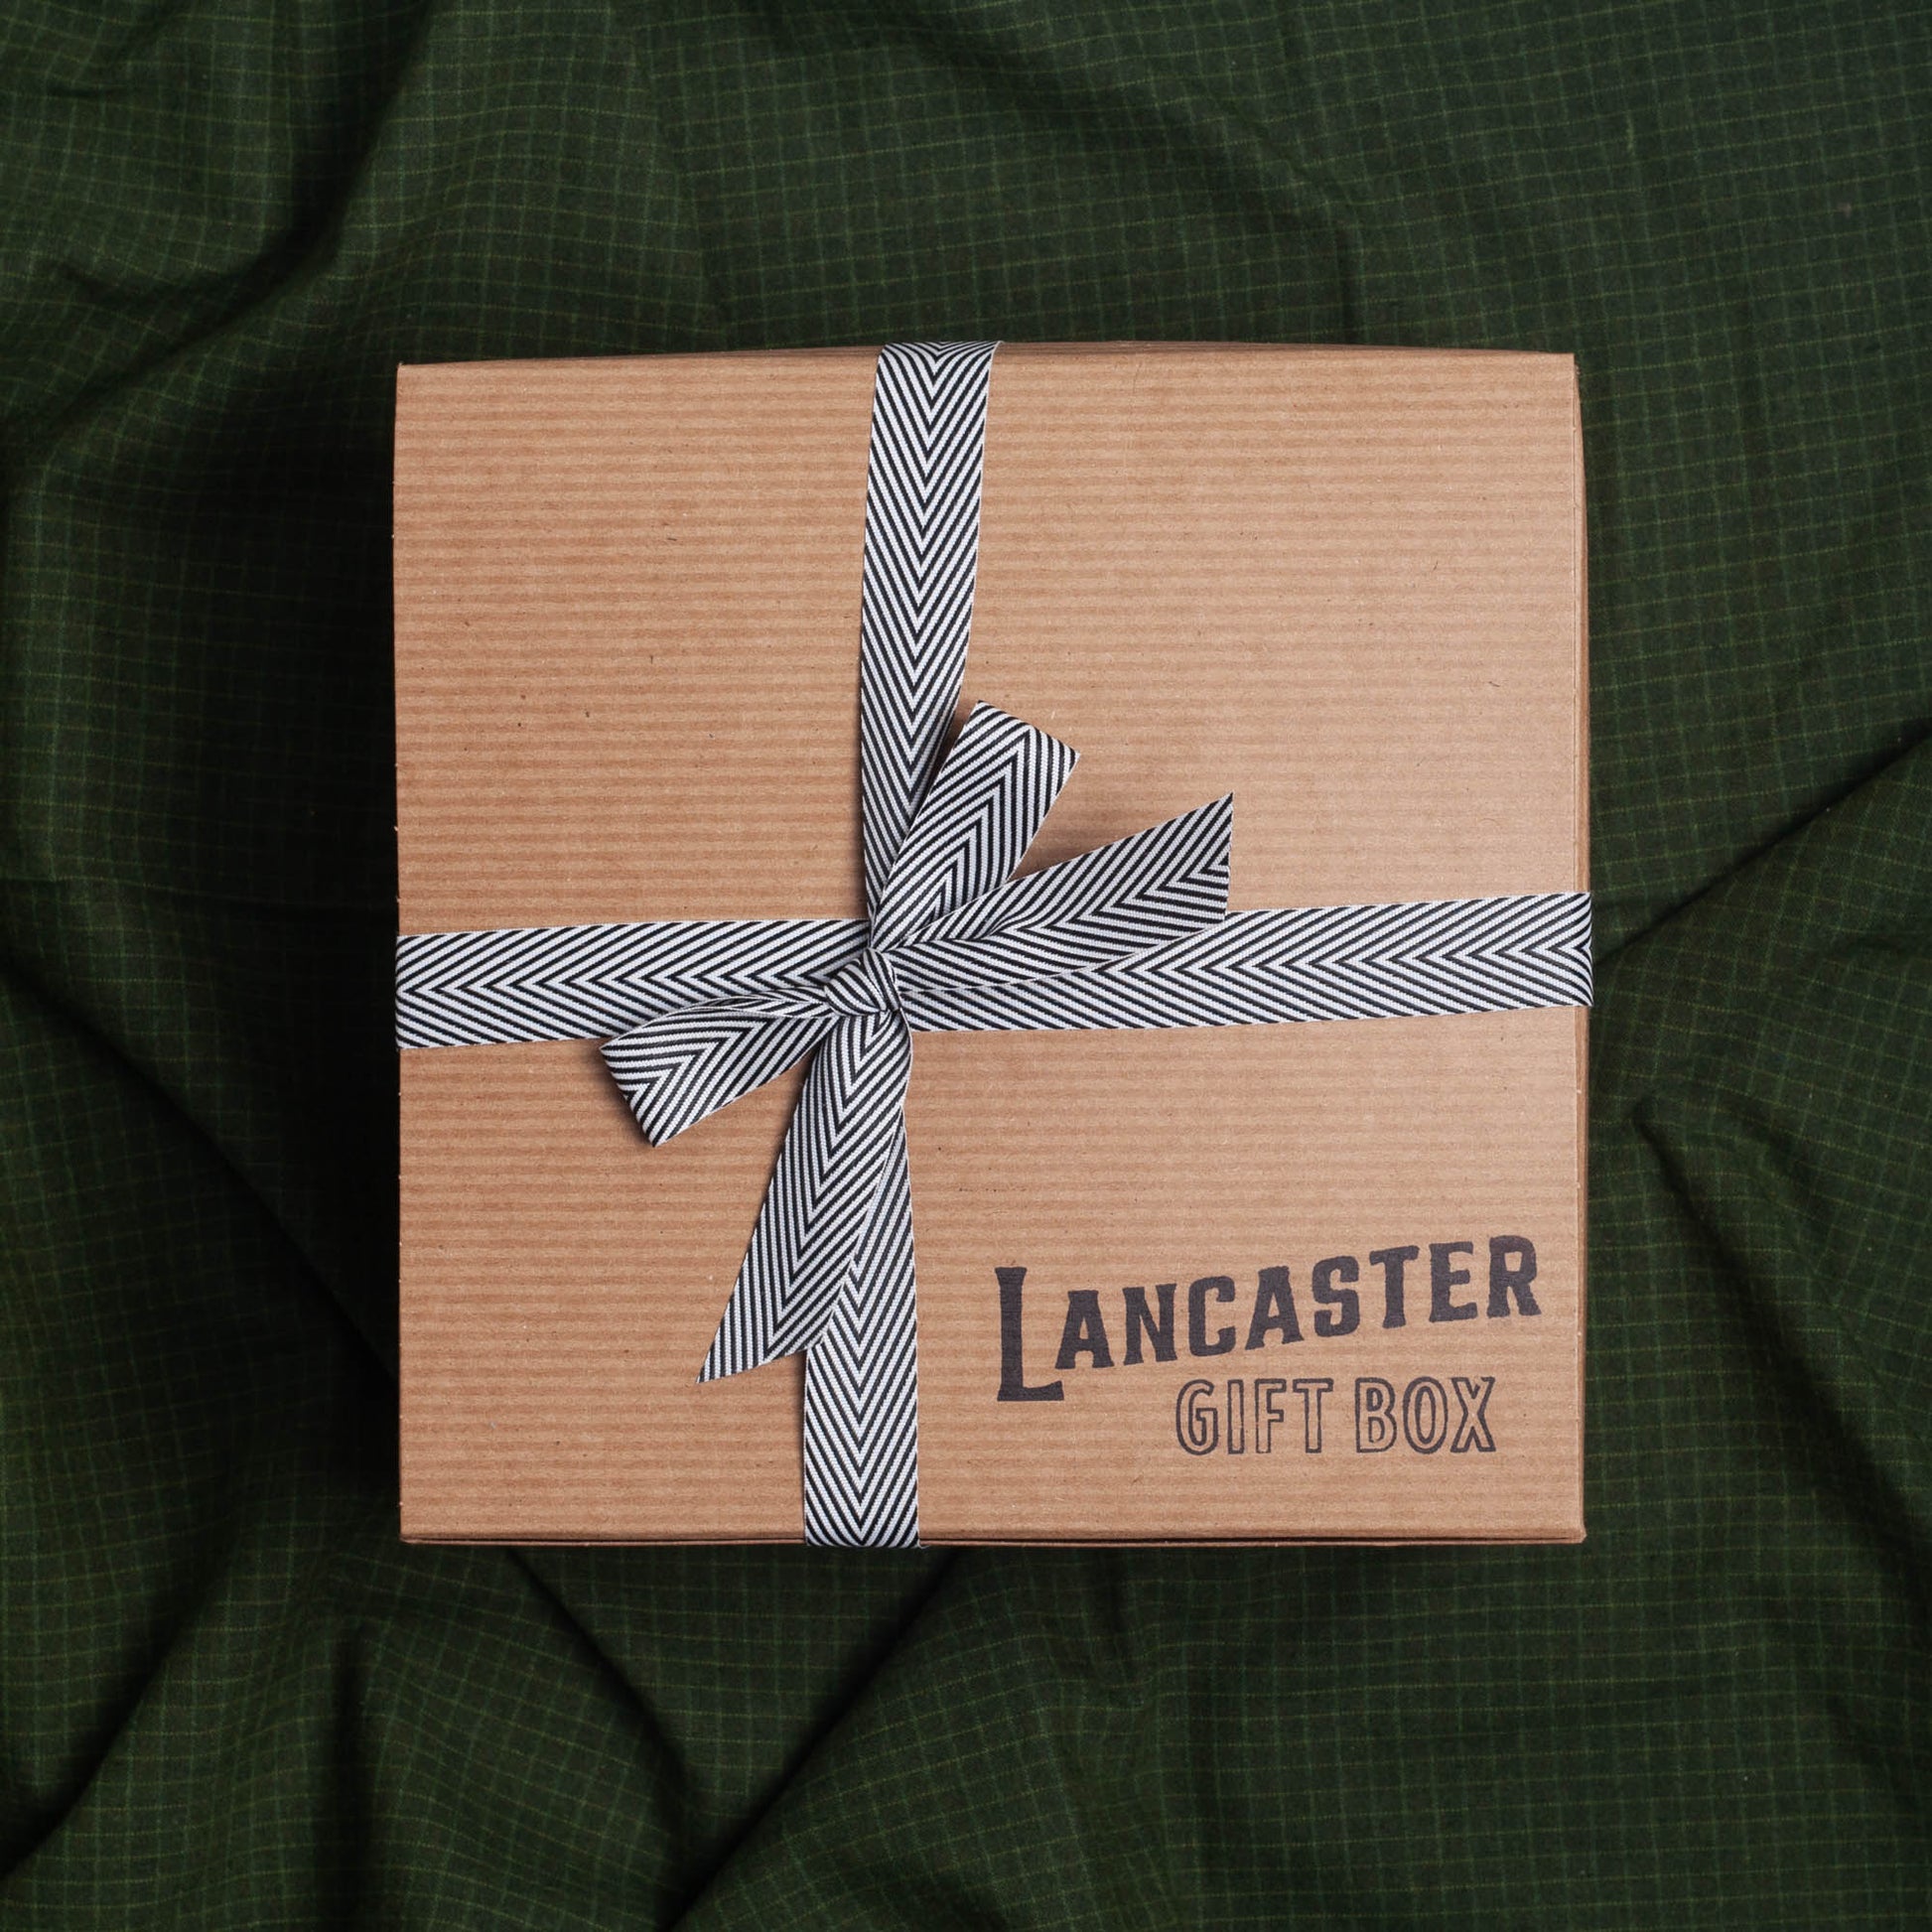 Lancaster Gift Box tied with Black and White bow.